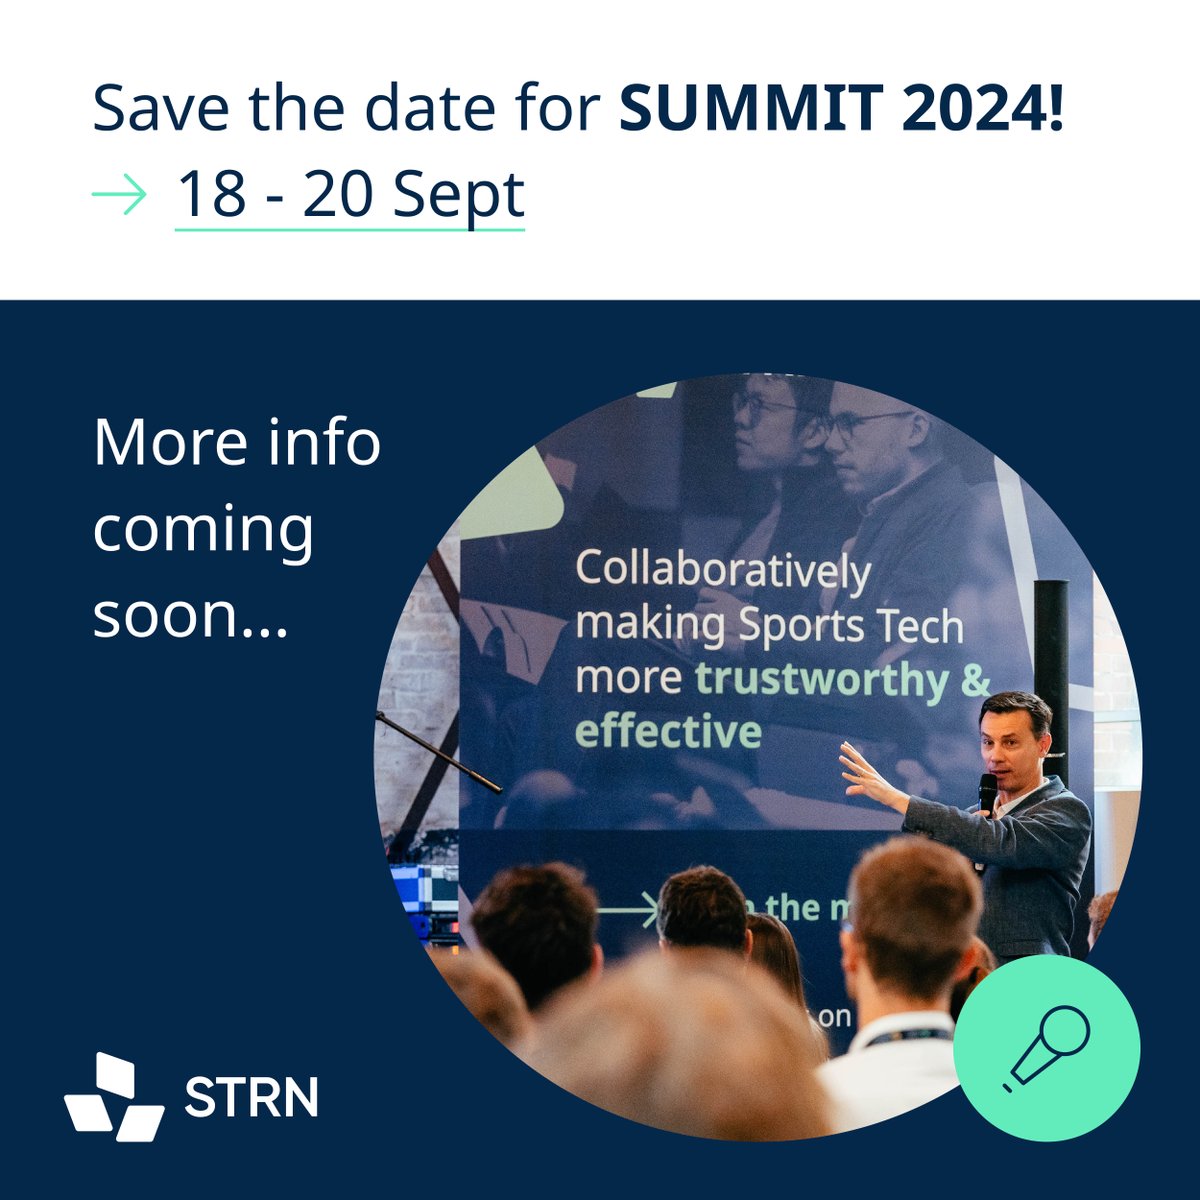 🔔 We've got GREAT news! 🔔 💥 The Summit returns this year from 18-20 Sept! 🤩 🙌 💥 It certainly won't be easy to top the last edition, but we do love a challenge 😎 💥 That's all we can say for now - keep a close watch on our social media & more details will follow soon! 👀